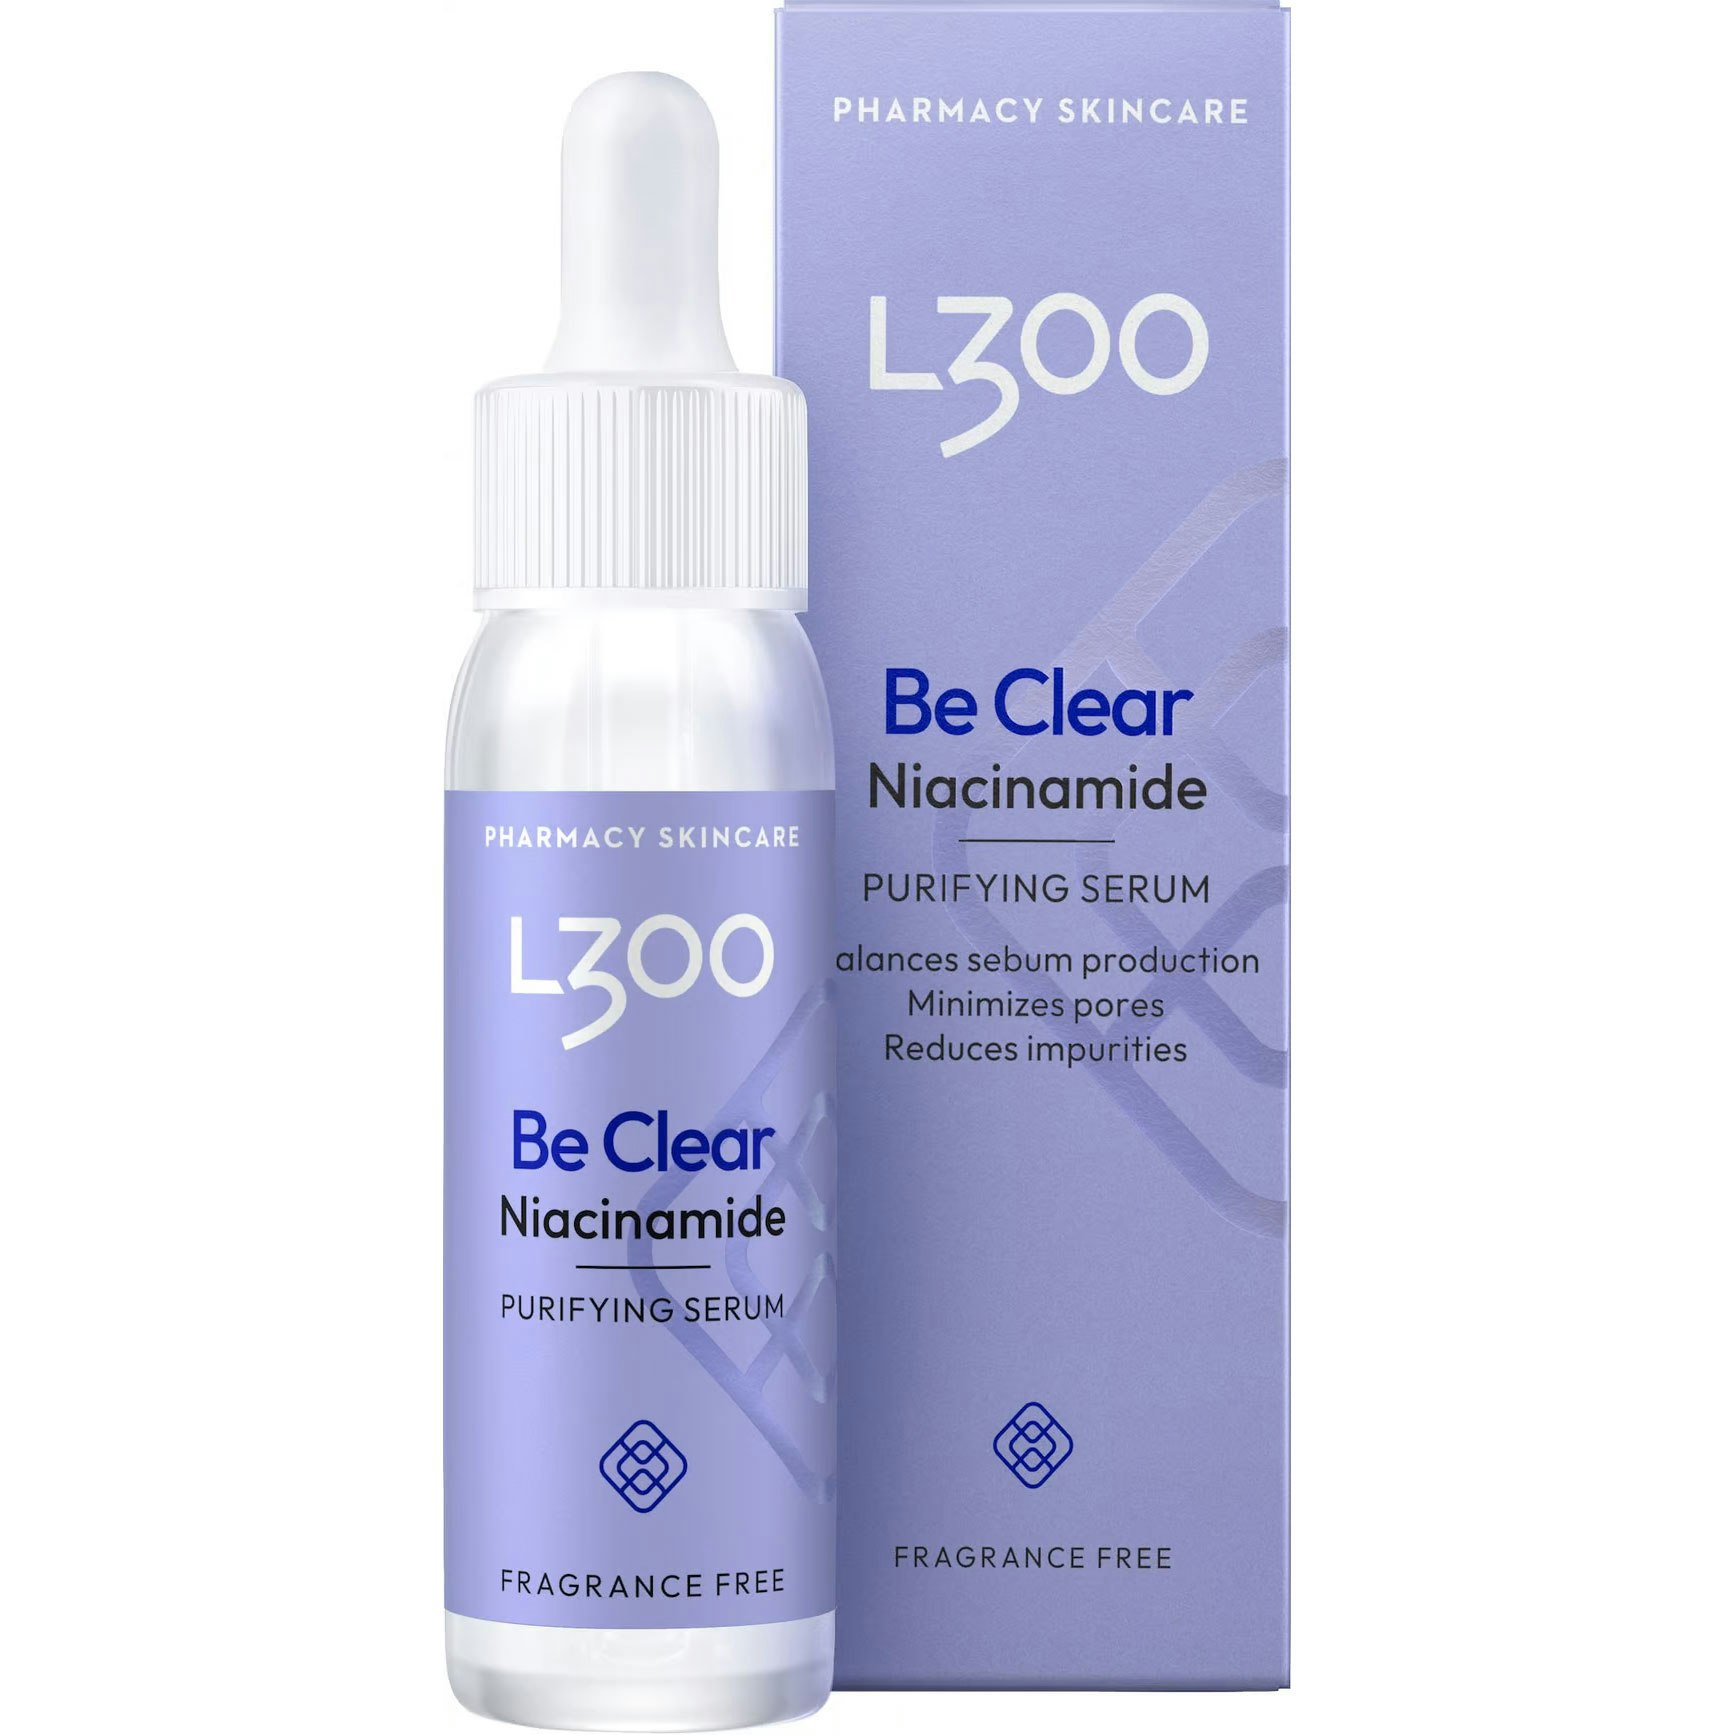 L300 Niacinamide Be Clear Purifying Serum - 30 ml